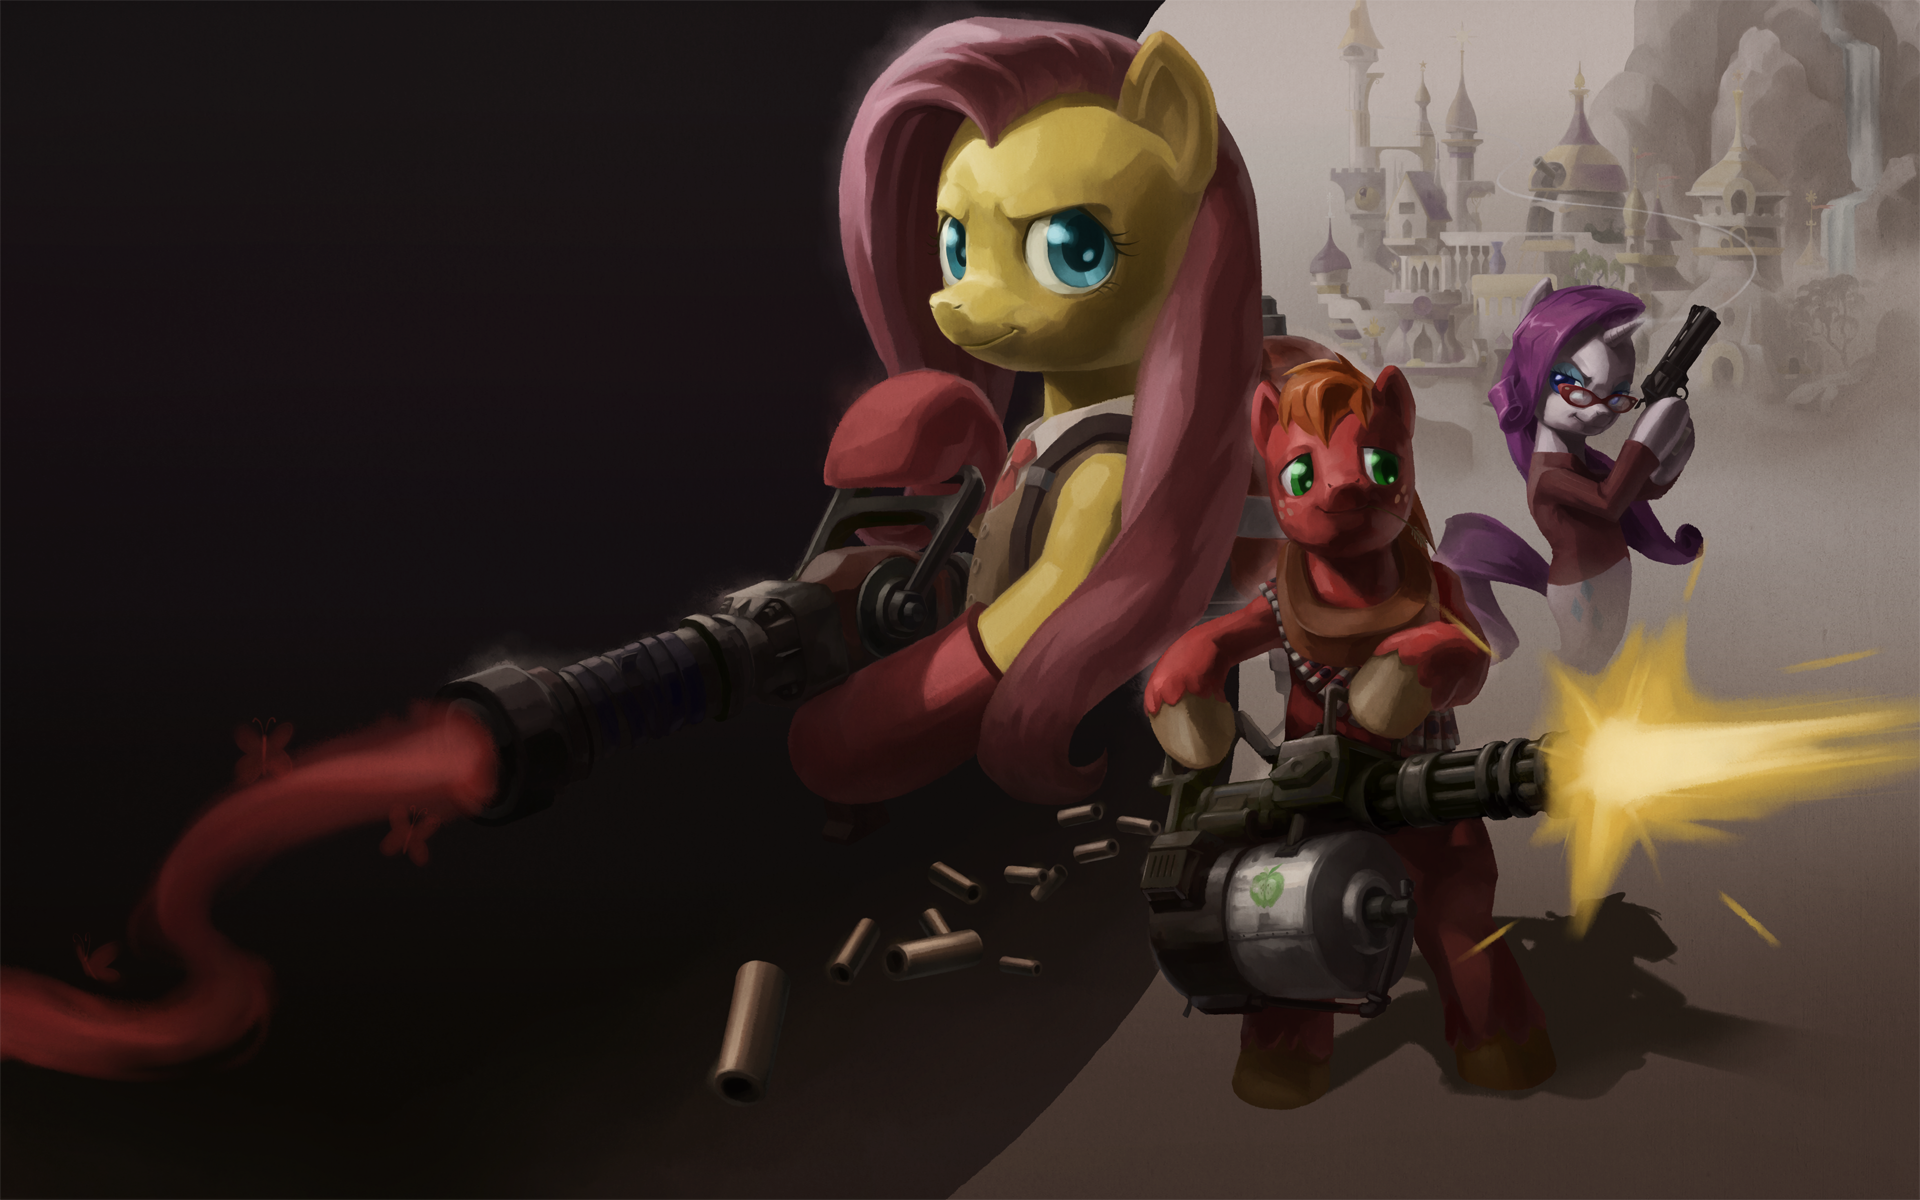 you__re_on_your_way_to__canterlot_by_stupjam-d4g4lqr.png